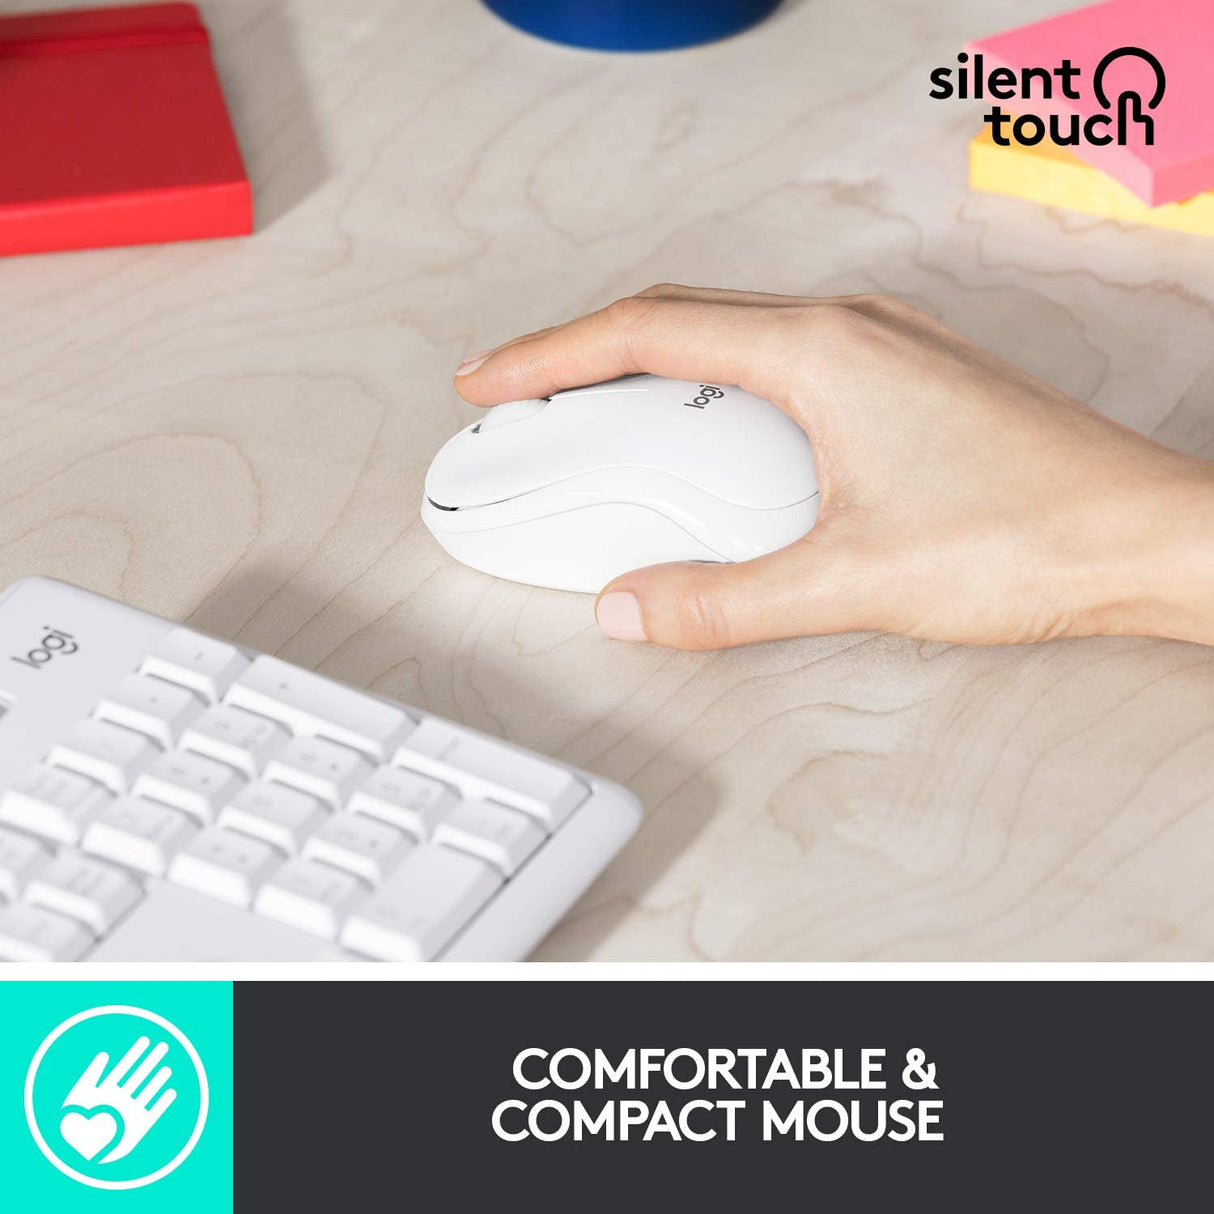 Logitech MK295 Wireless Mouse &amp; Keyboard Combo with SilentTouch Technology, Full Numpad, Advanced Optical Tracking, Lag-Free Wireless, 90% Less Noise - Off White